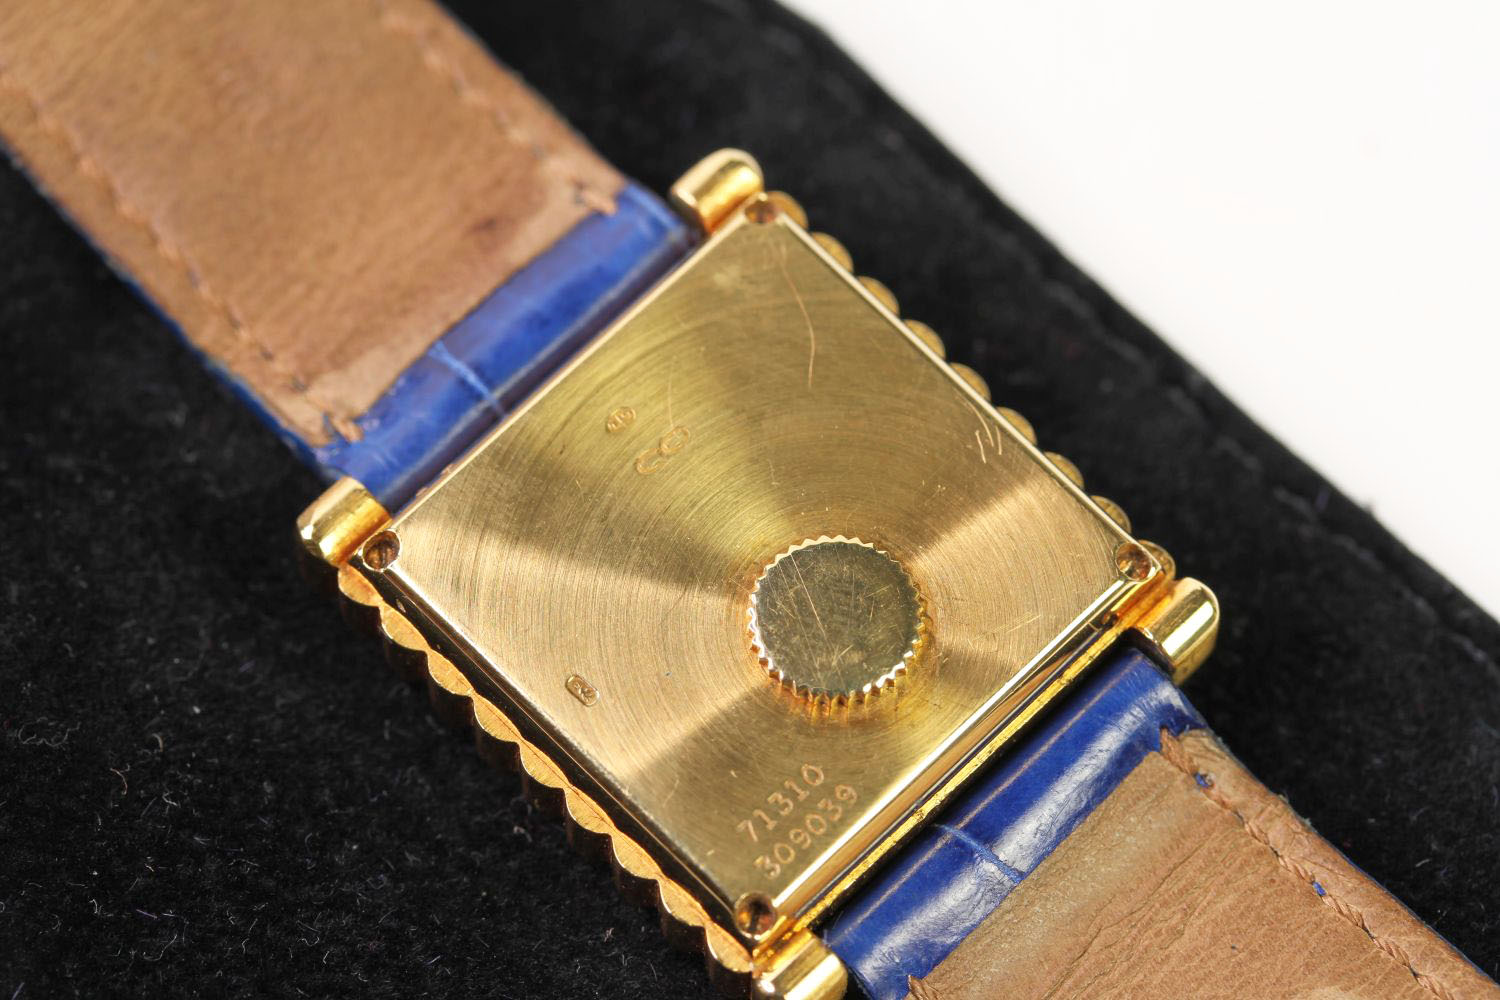 18CT PIAGET LAPIS WRIST WATCH WITH PAPERS AND POUCH REFERENCE 71310, square lapis dial with gold - Image 4 of 4